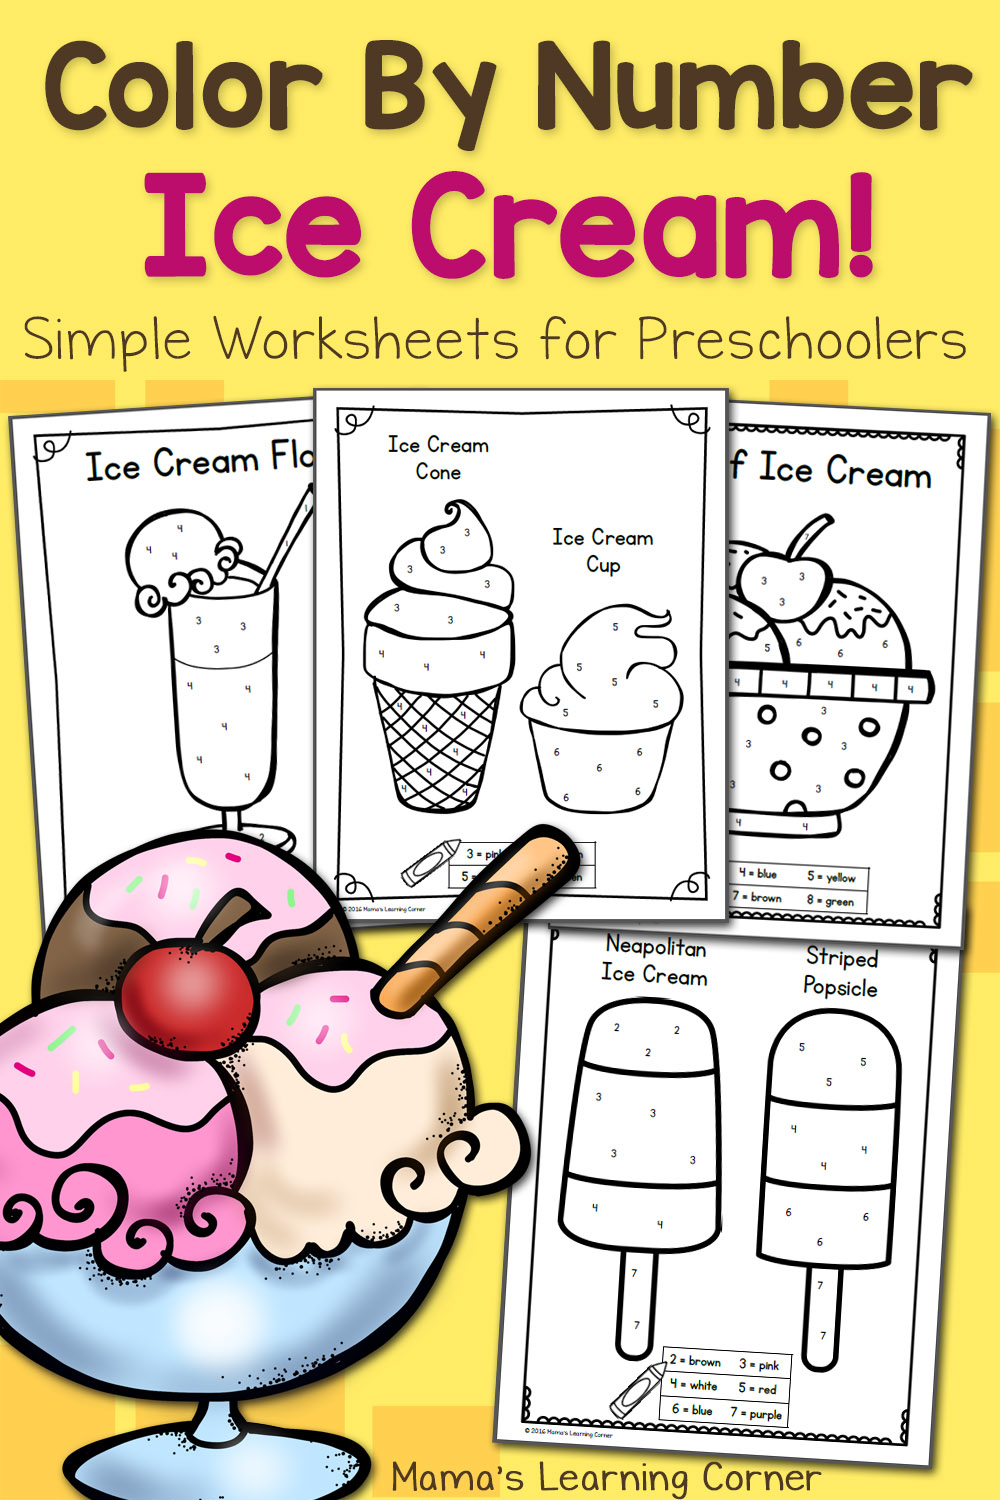 Color By Number Worksheets for Preschool: Ice Cream! 8 printable pages!